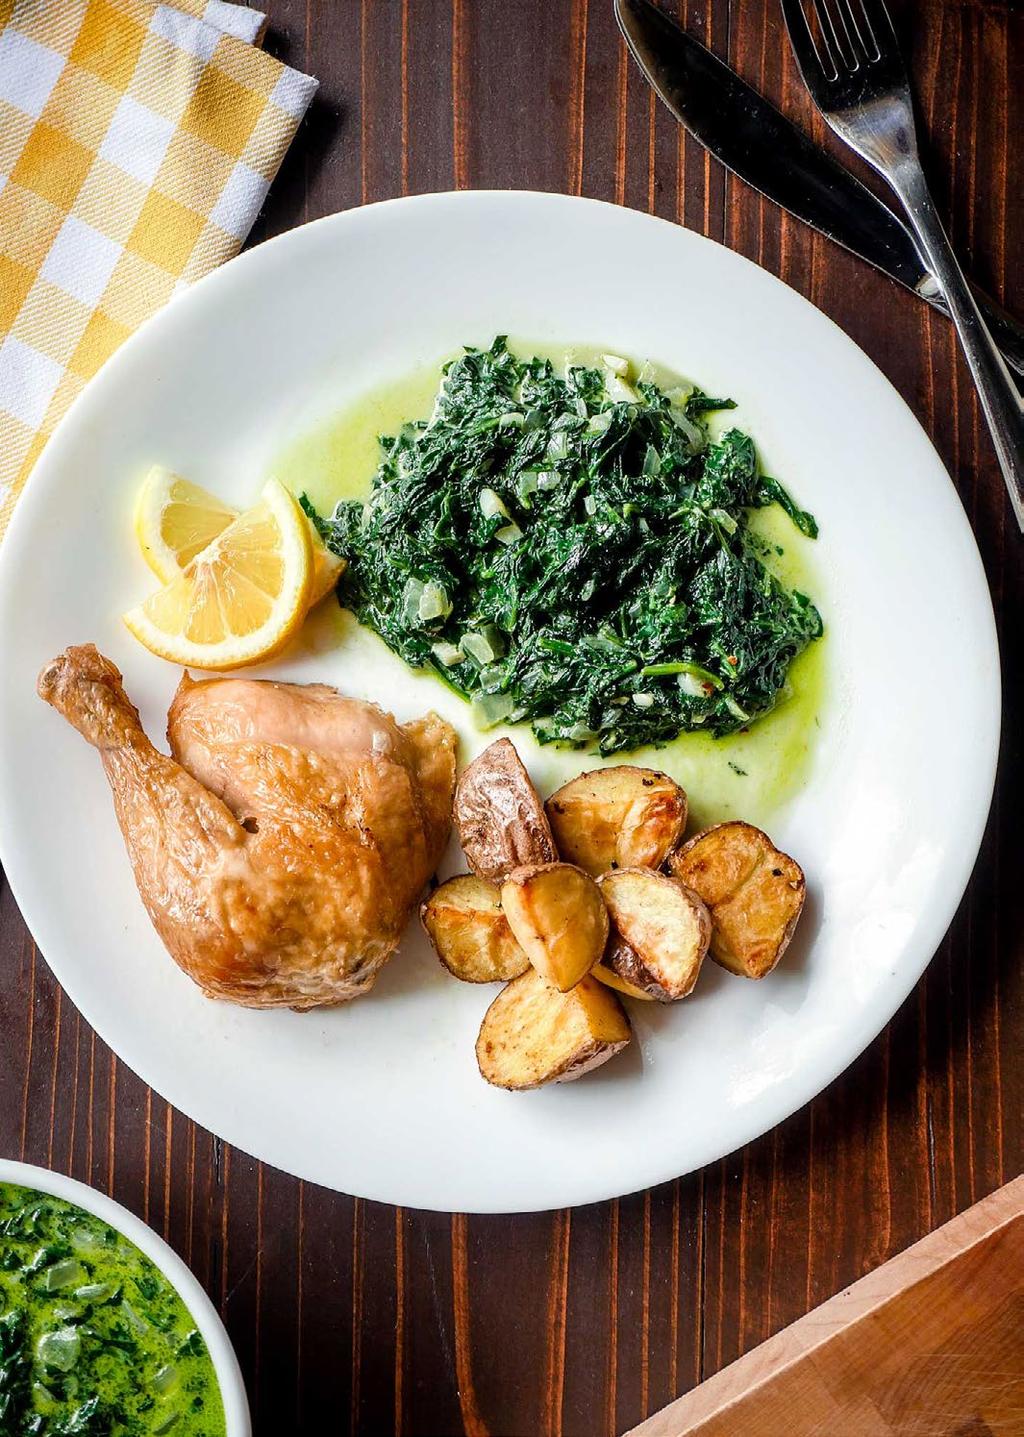 Chicken Legs with Roasted Potatoes and Creamed Spinach Directions: Preheat the oven to 400 F. In a large mixing bowl, combine the olive oil, salt, and pepper. Add the potatoes and toss until coated.